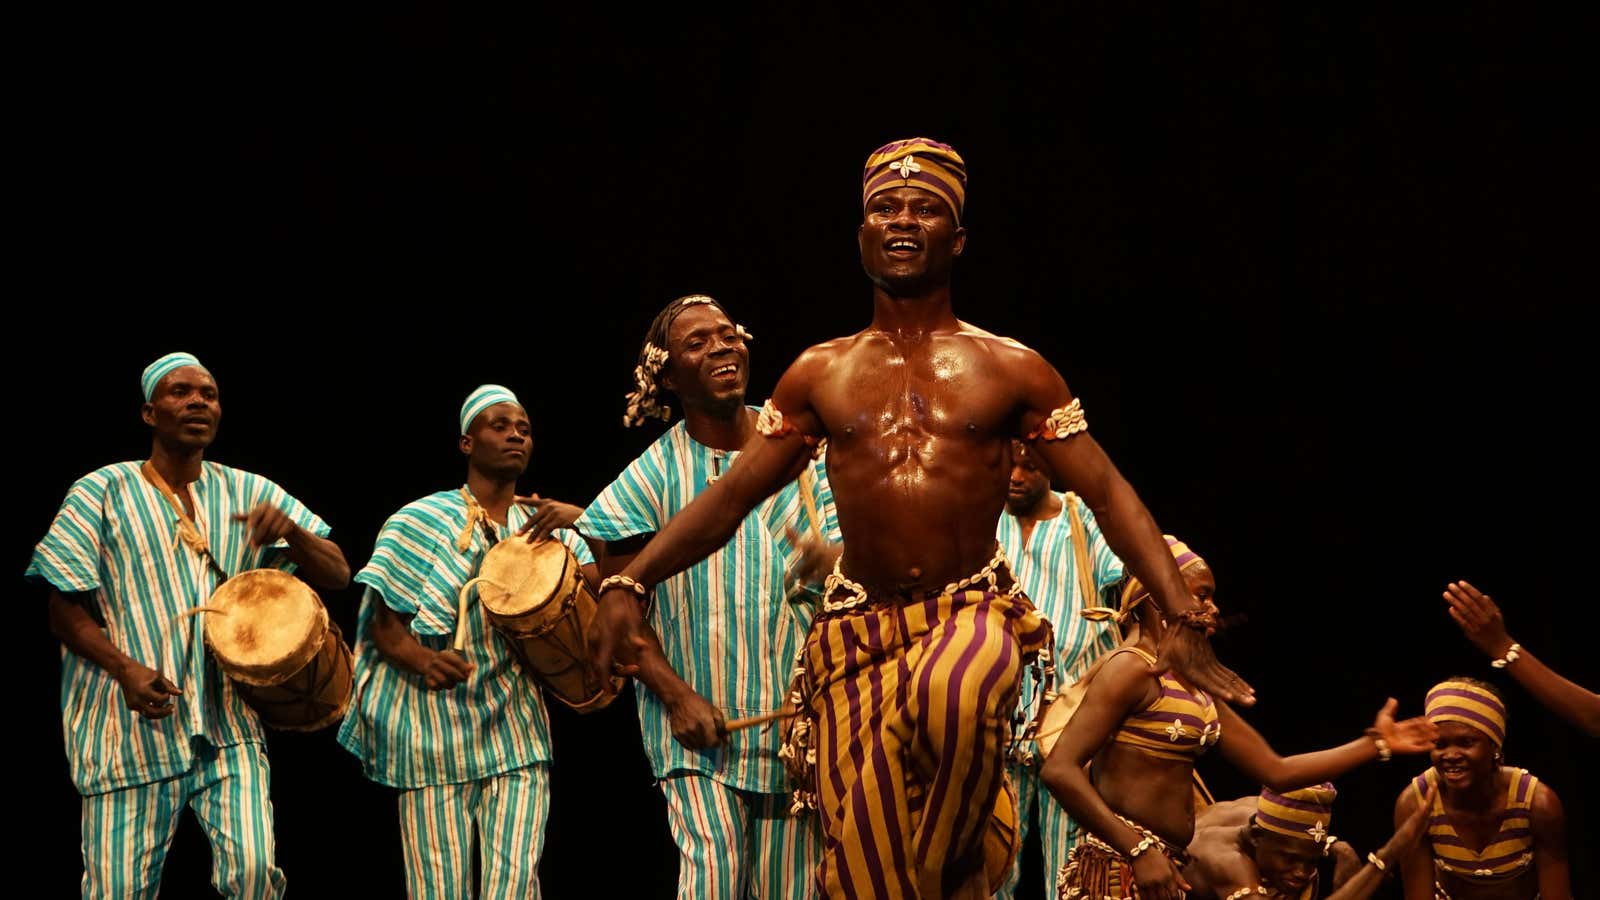 A traditional troupe from Eastern Burkina Faso called Yempabou de Fada closes the show on the opening night of the dance festival at the French Institute in Ouagadougou